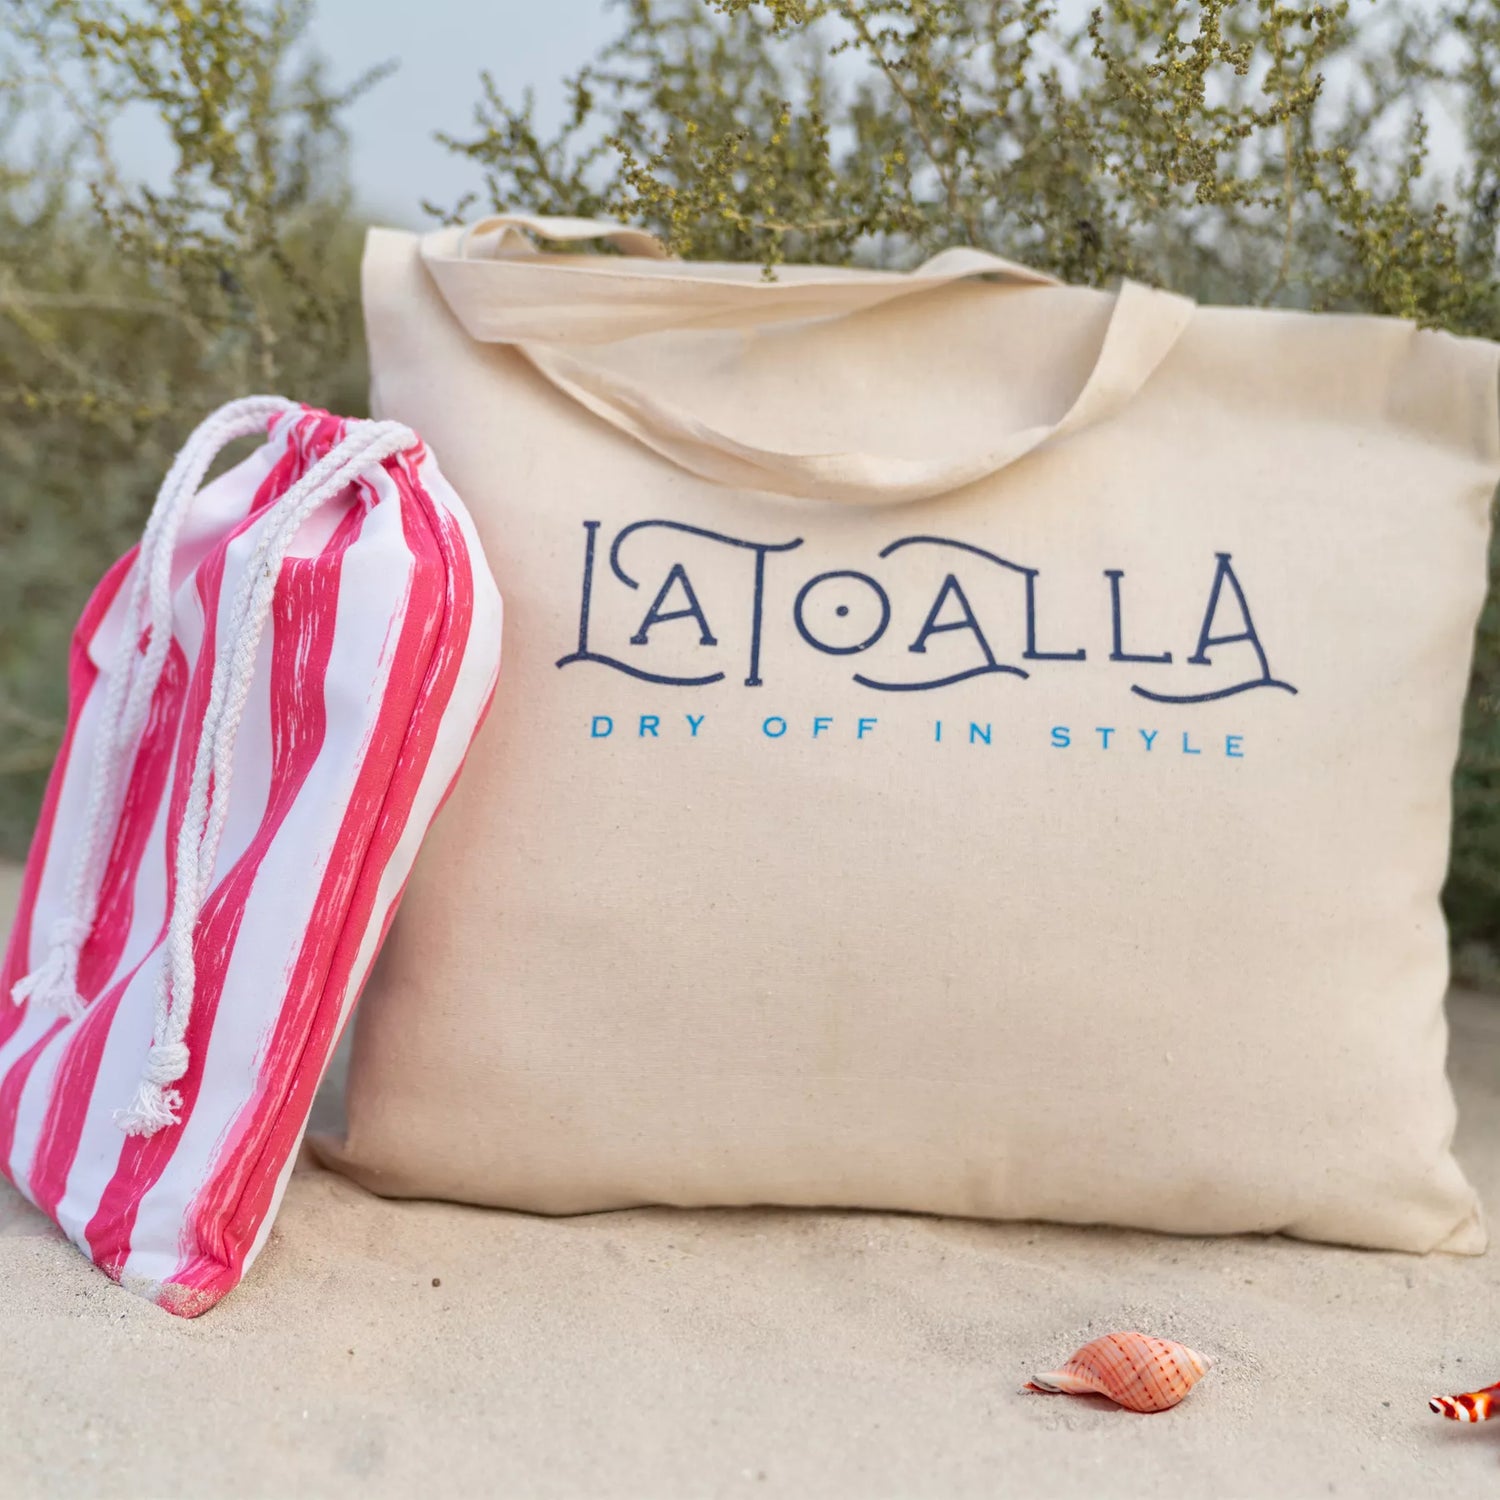 a Quick Dry, Sand Free, Light Weight, Compact and Ecofriendly Microfiber Beach Towel pouch leaning on a La Toalla tote bag